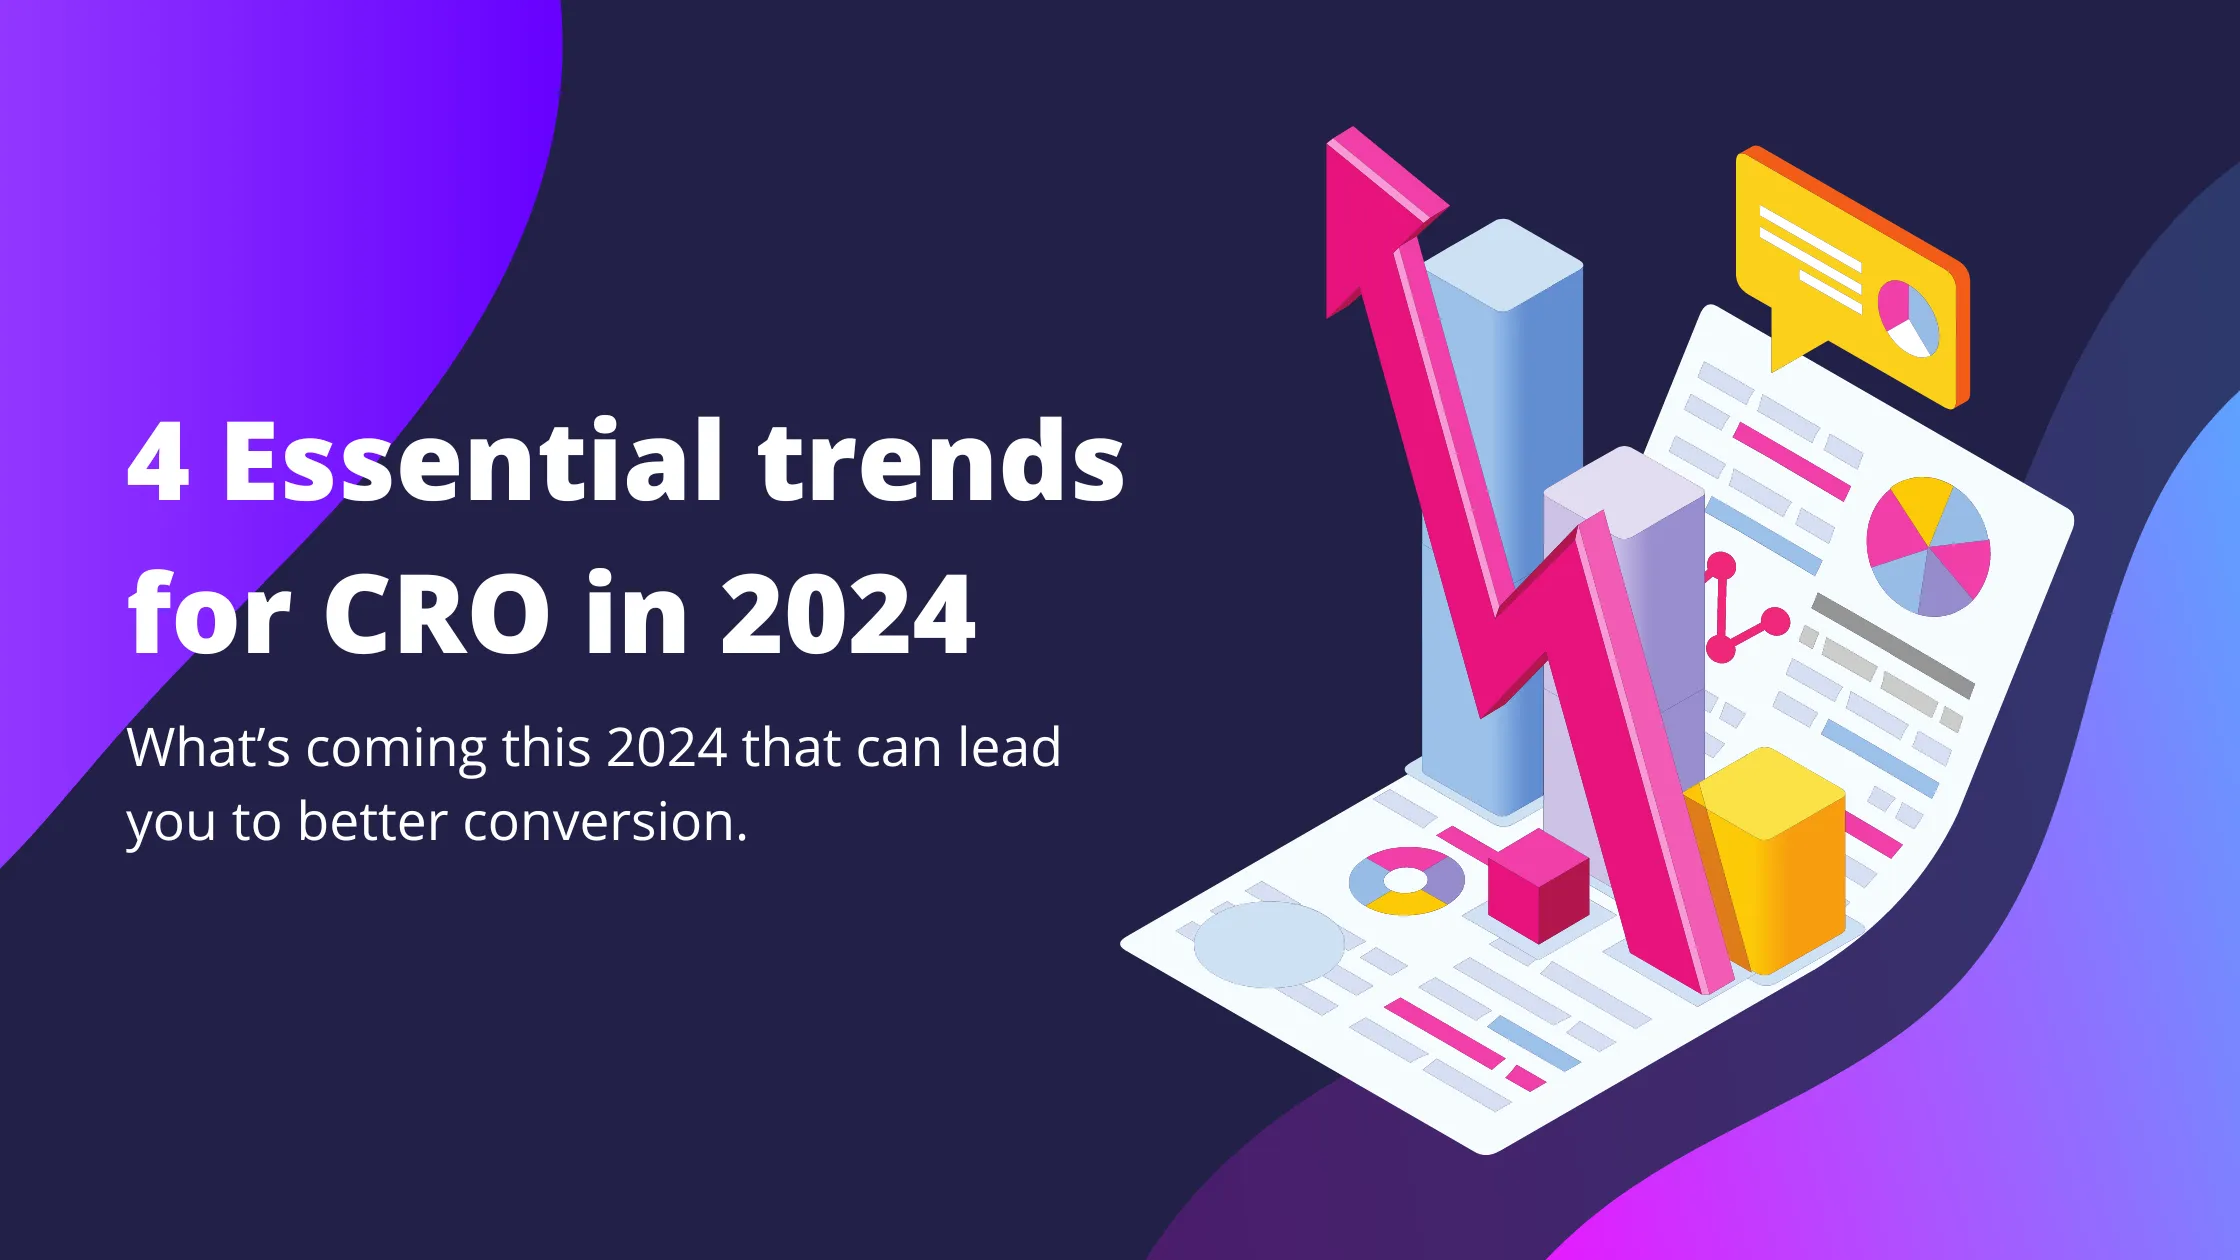 4 Essential trends for CRO in 2024